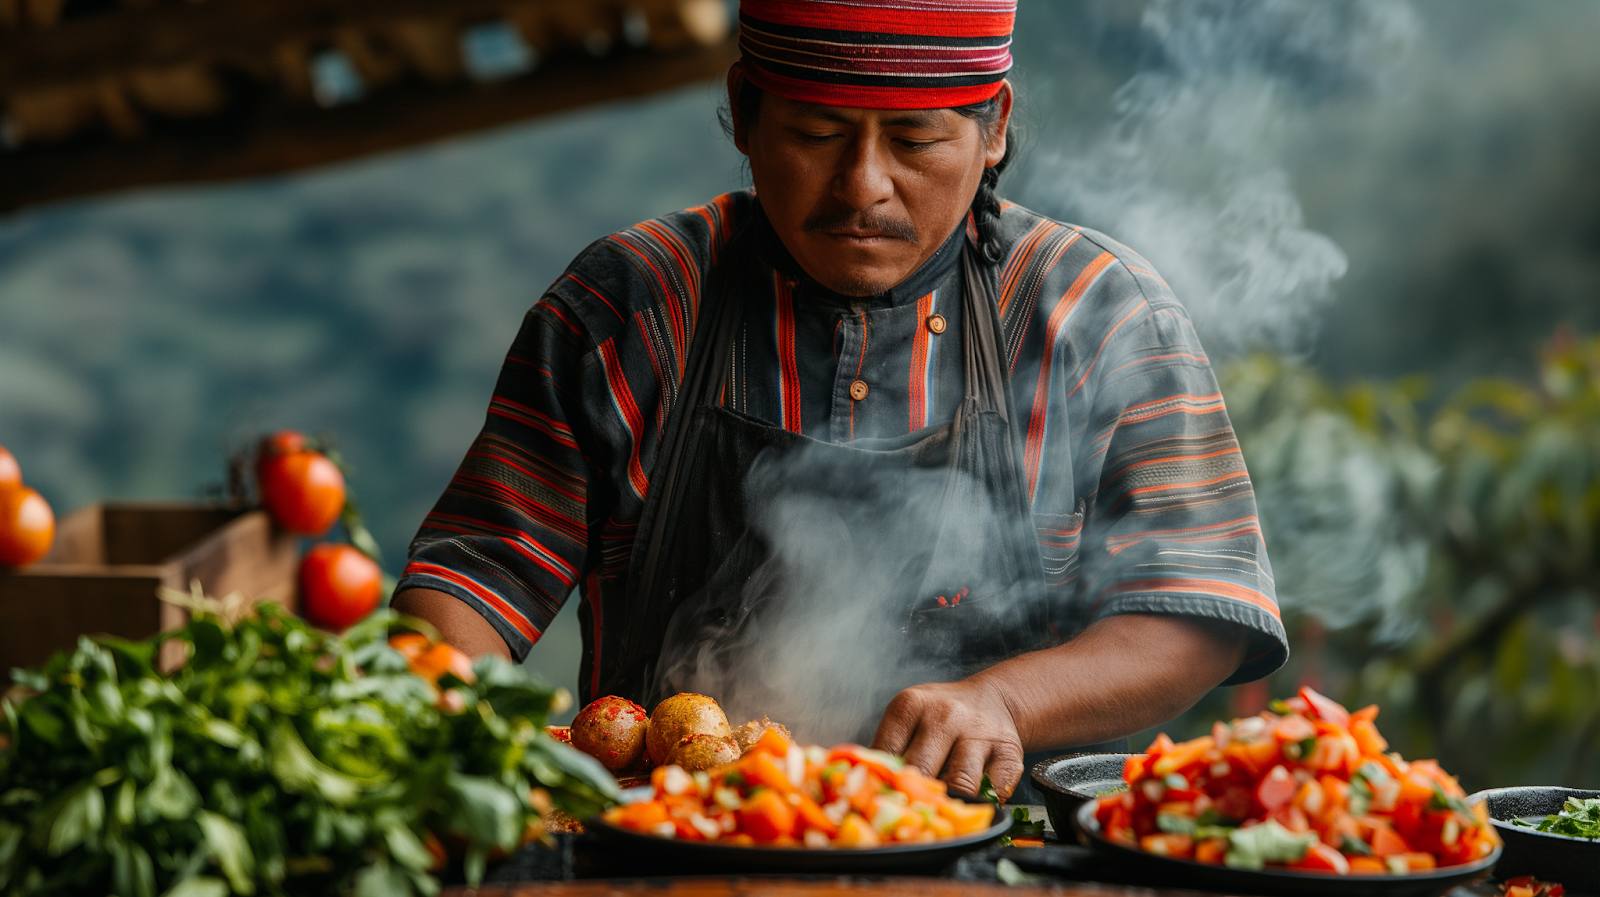 A chef in Aguas Calientes skillfully preparing a traditional Peruvian dish using fresh local ingredients